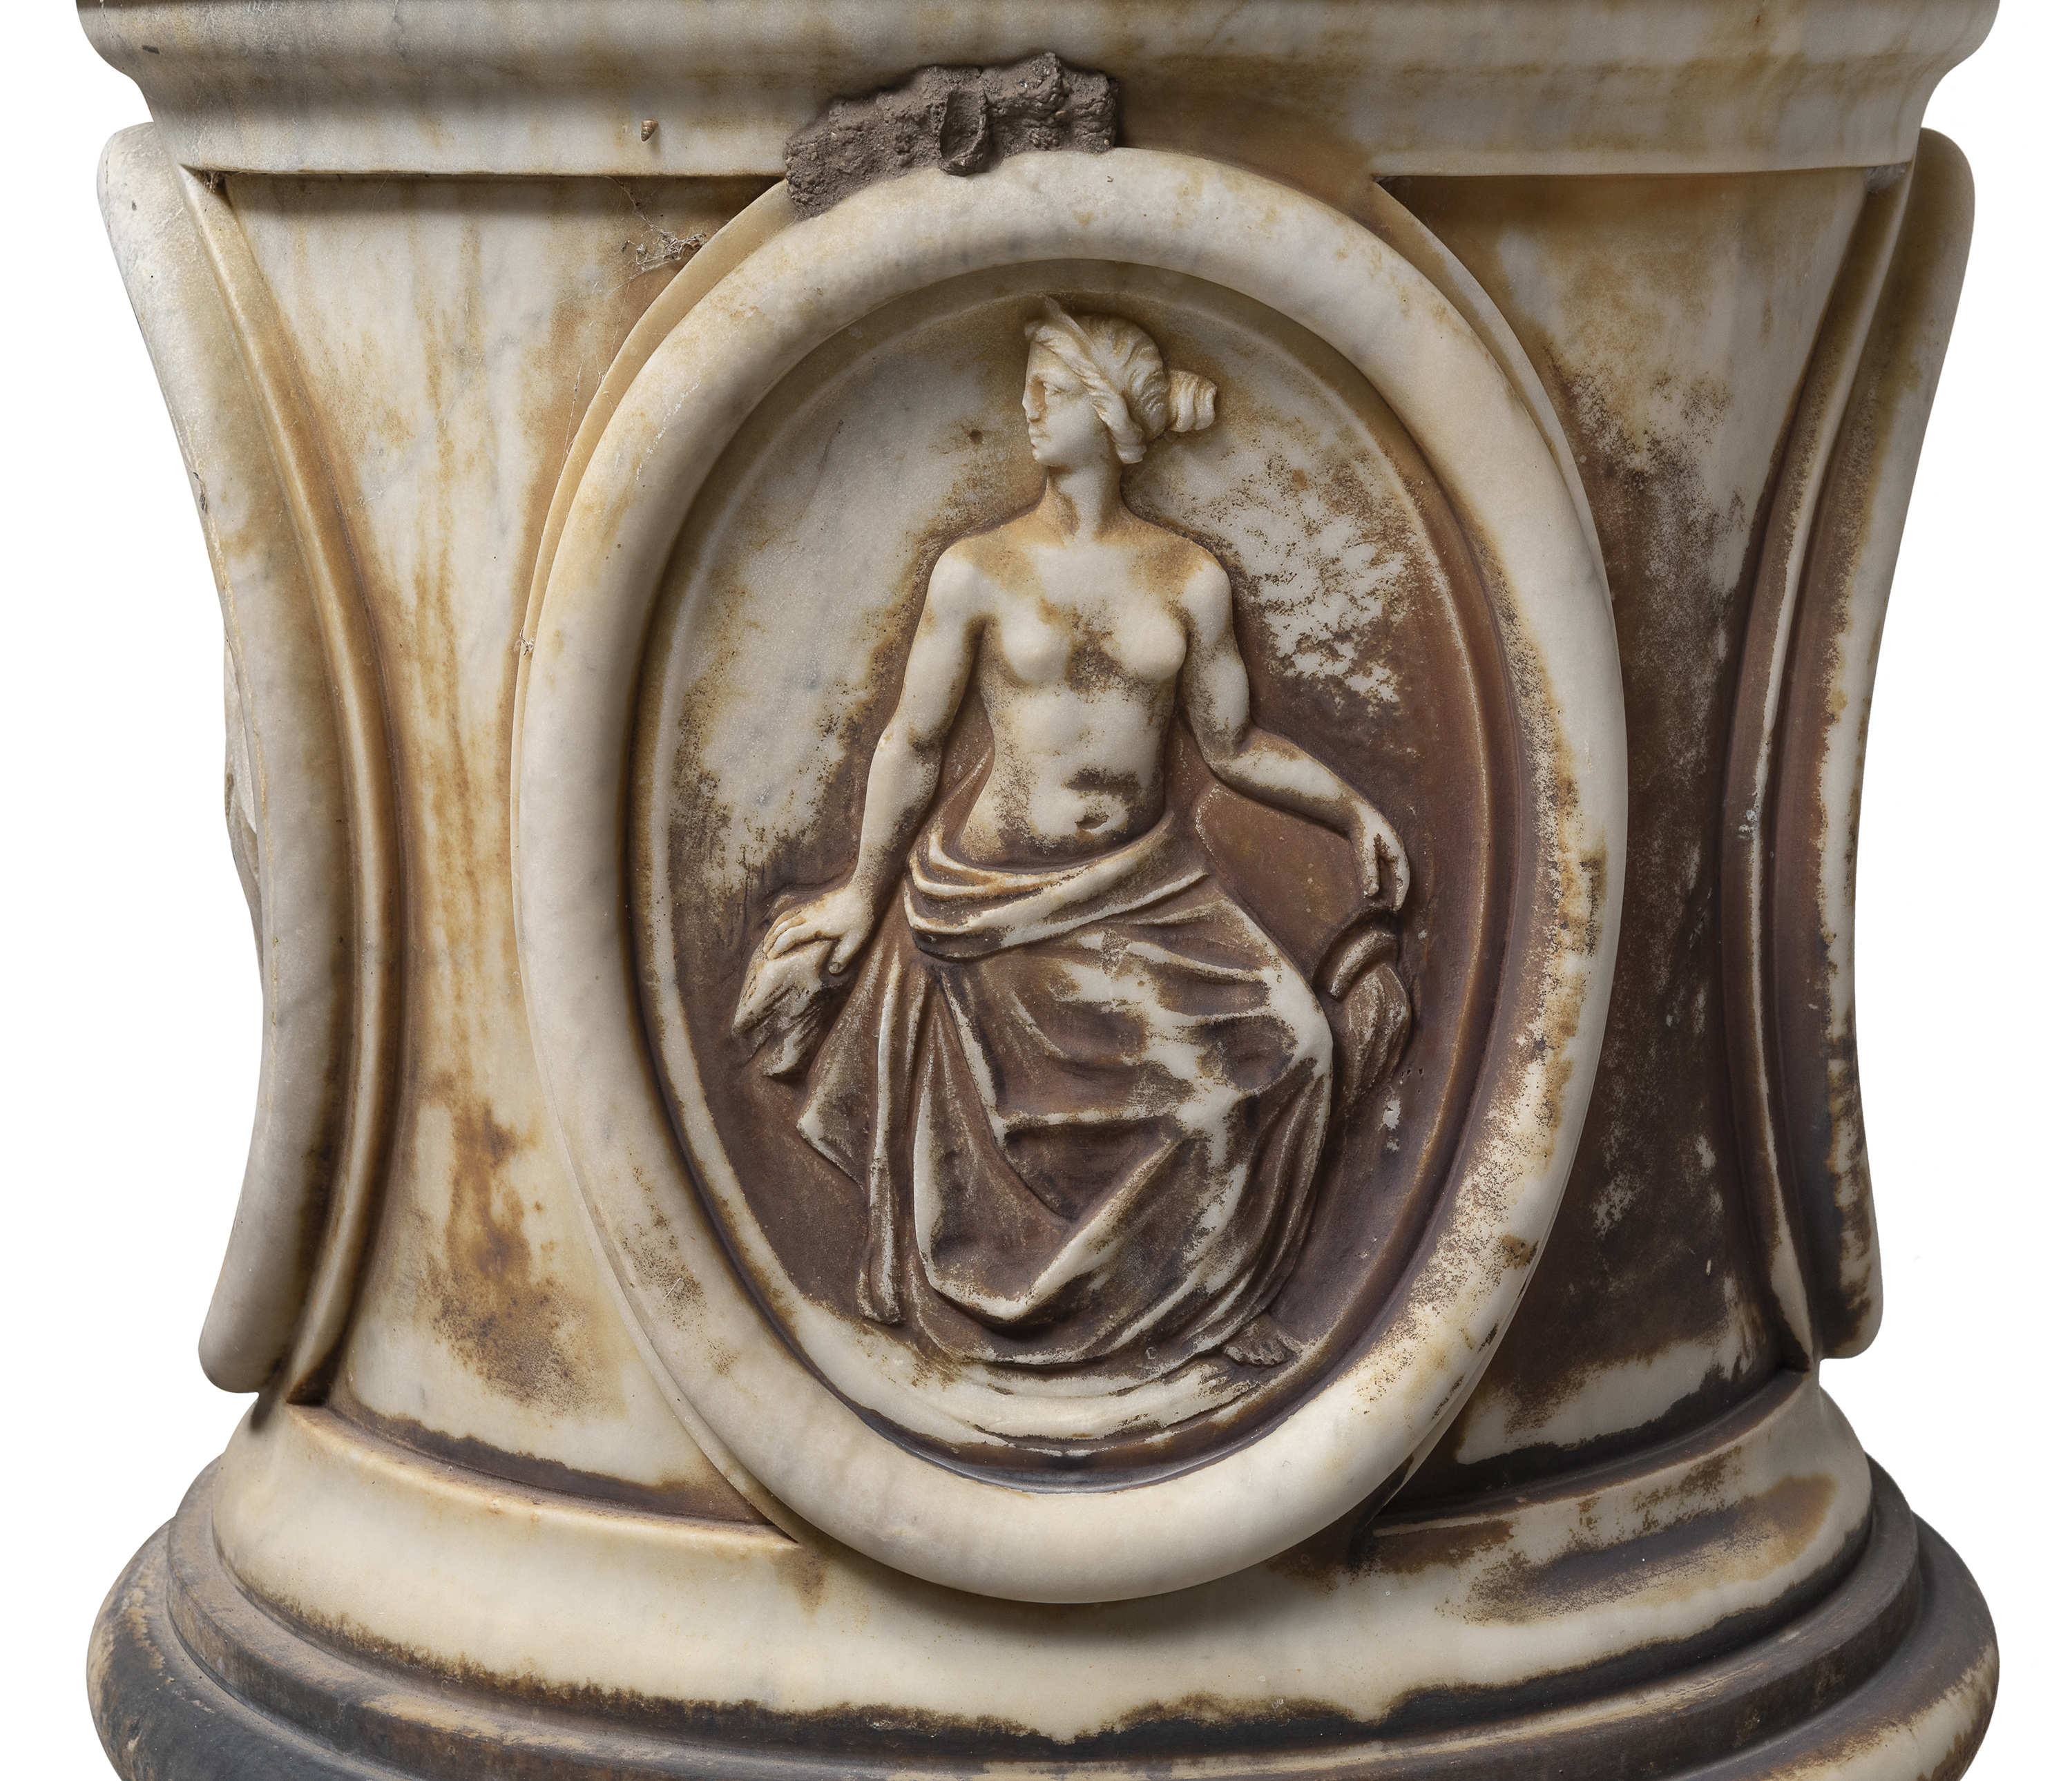 MEDICI VASE IN WHITE MARBLE NEOCLASSIC STYLE EARLY 20TH CENTURY - Image 2 of 3